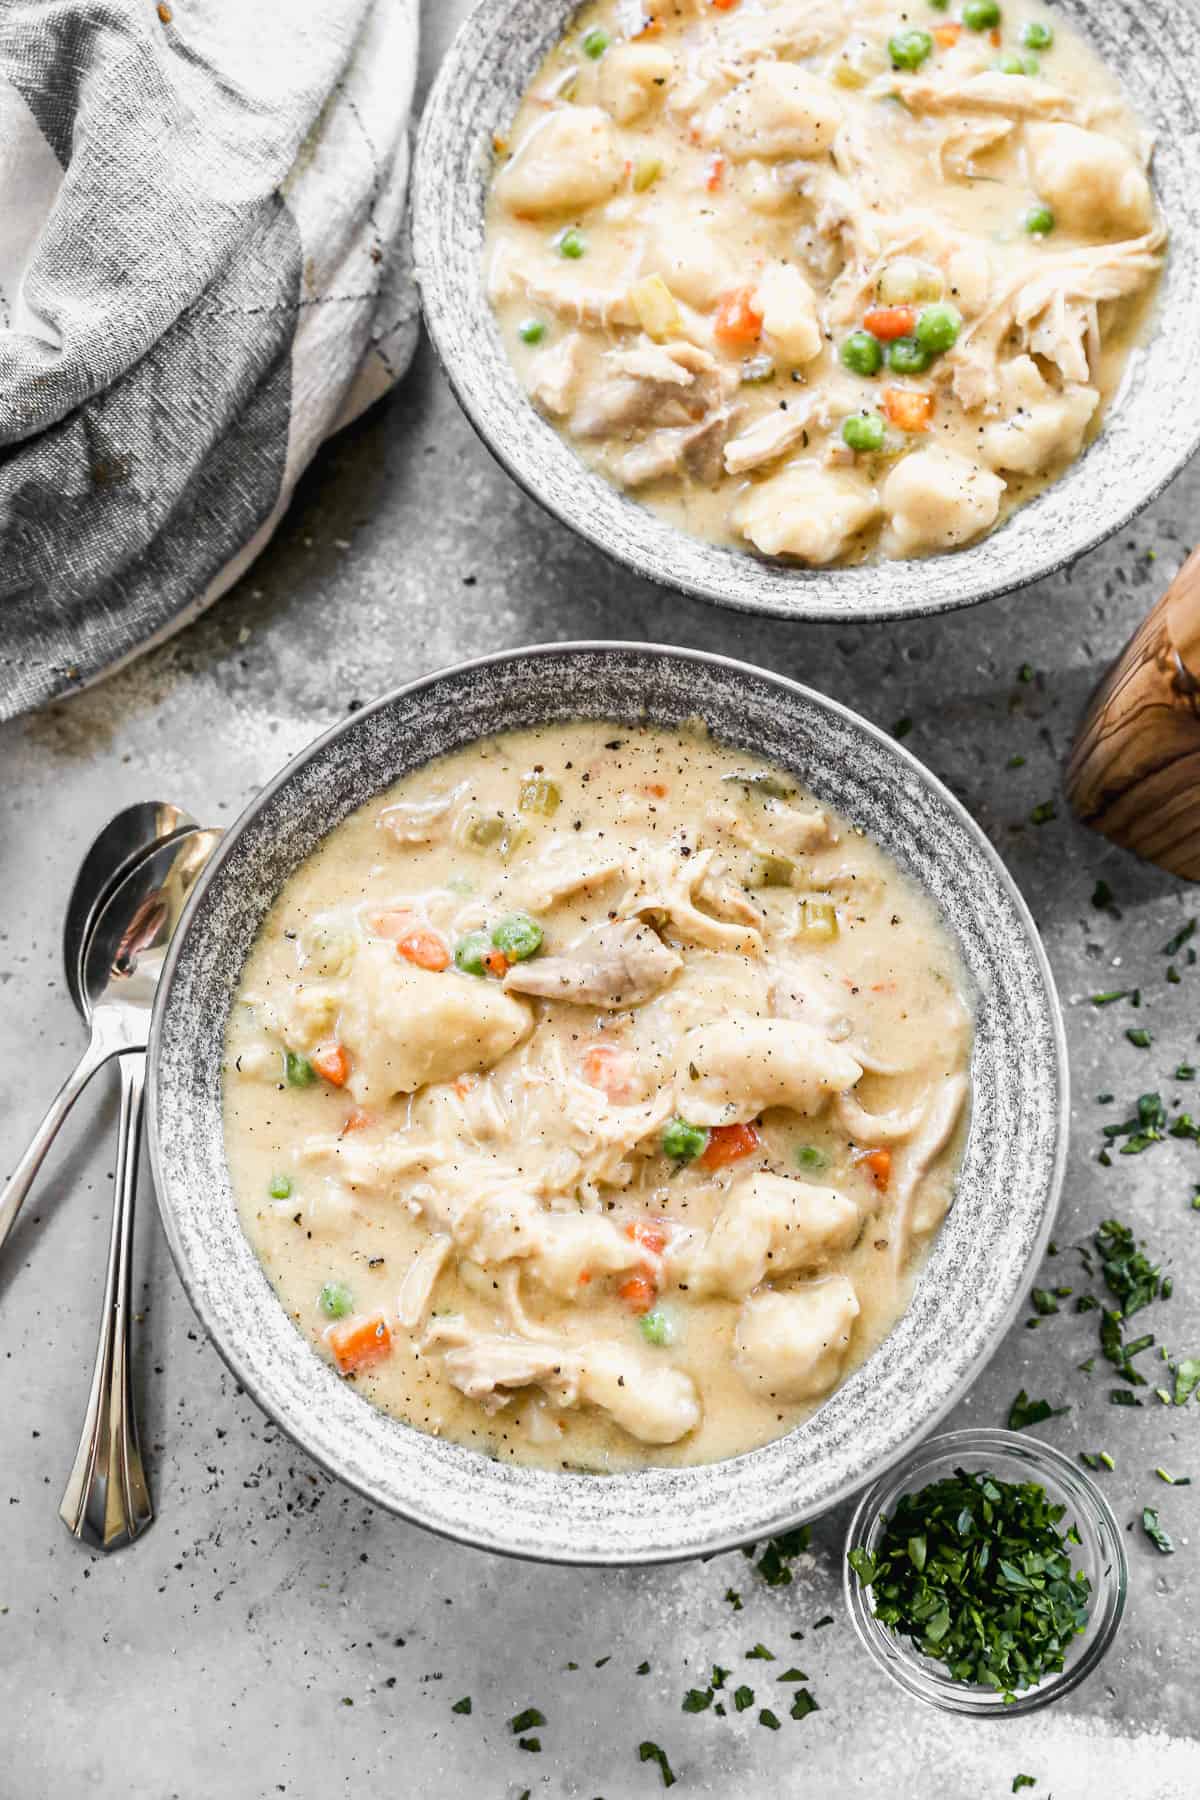 Two bowls of homemade Chicken and Dumplings, ready to eat.